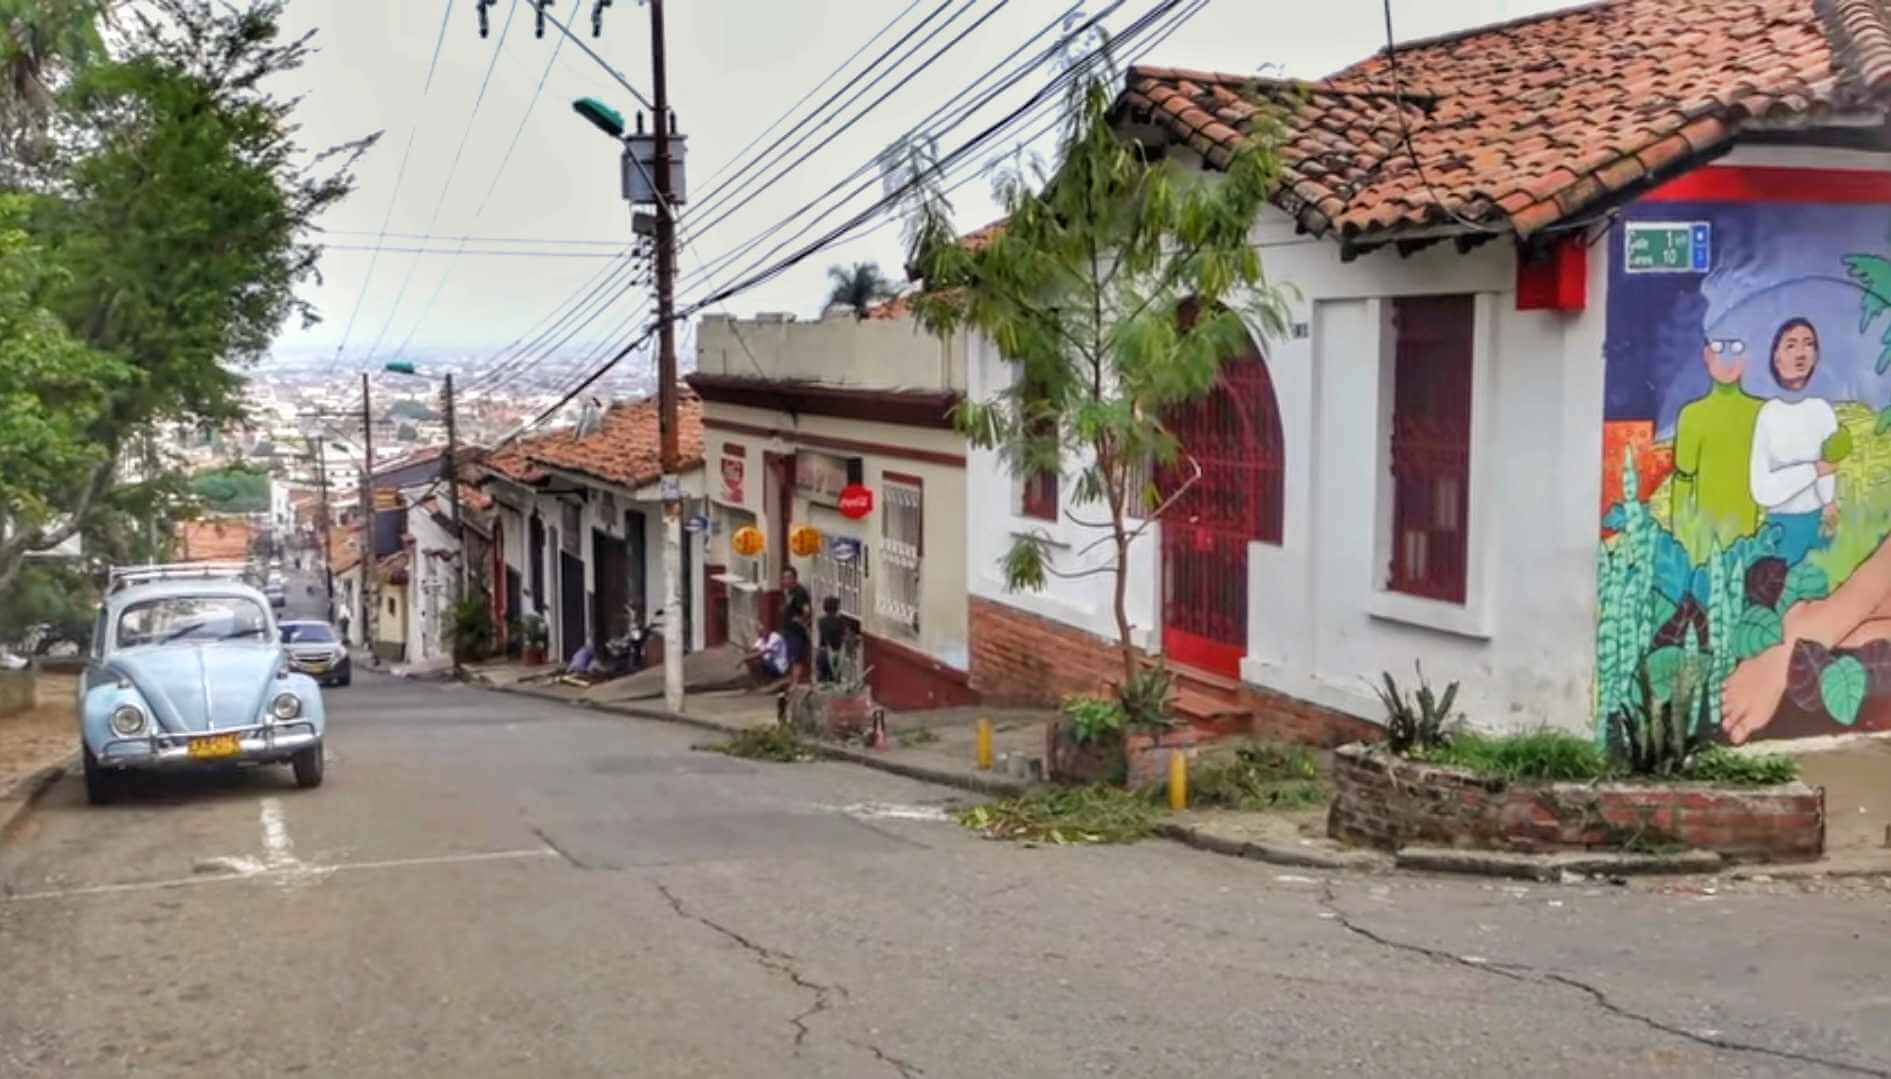 Cali Colombia street